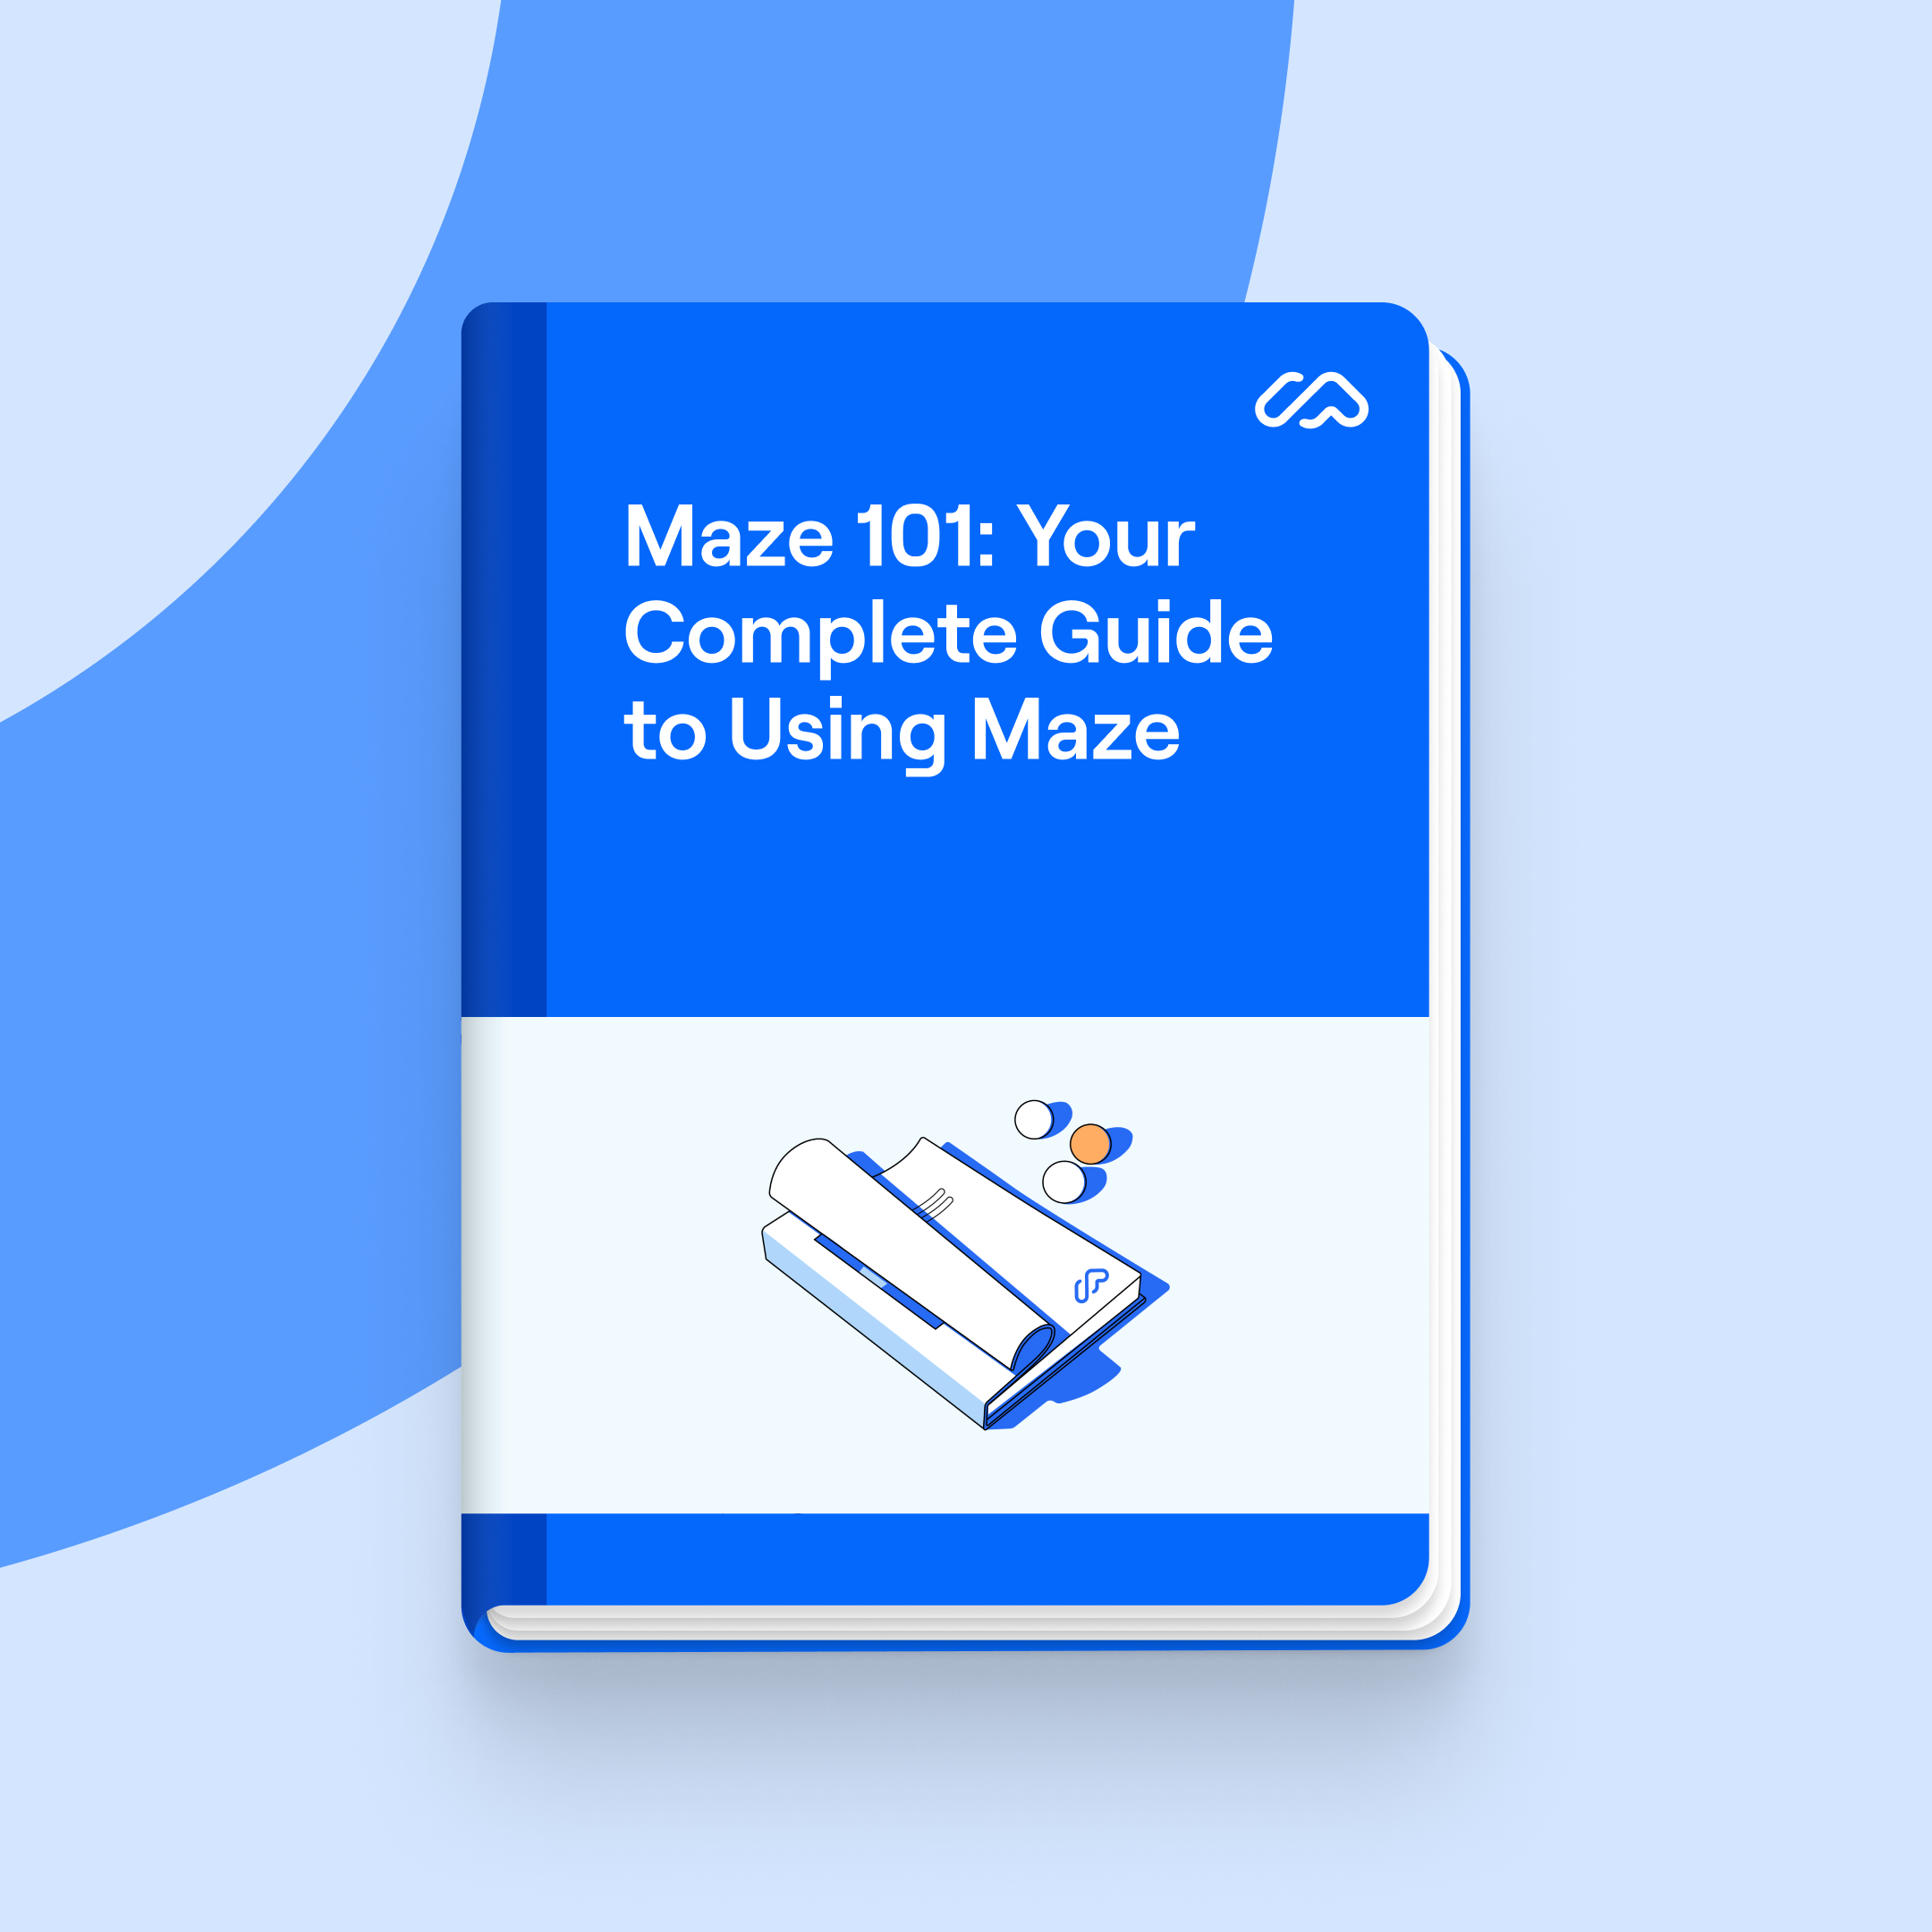 The Complete Guide to Maze